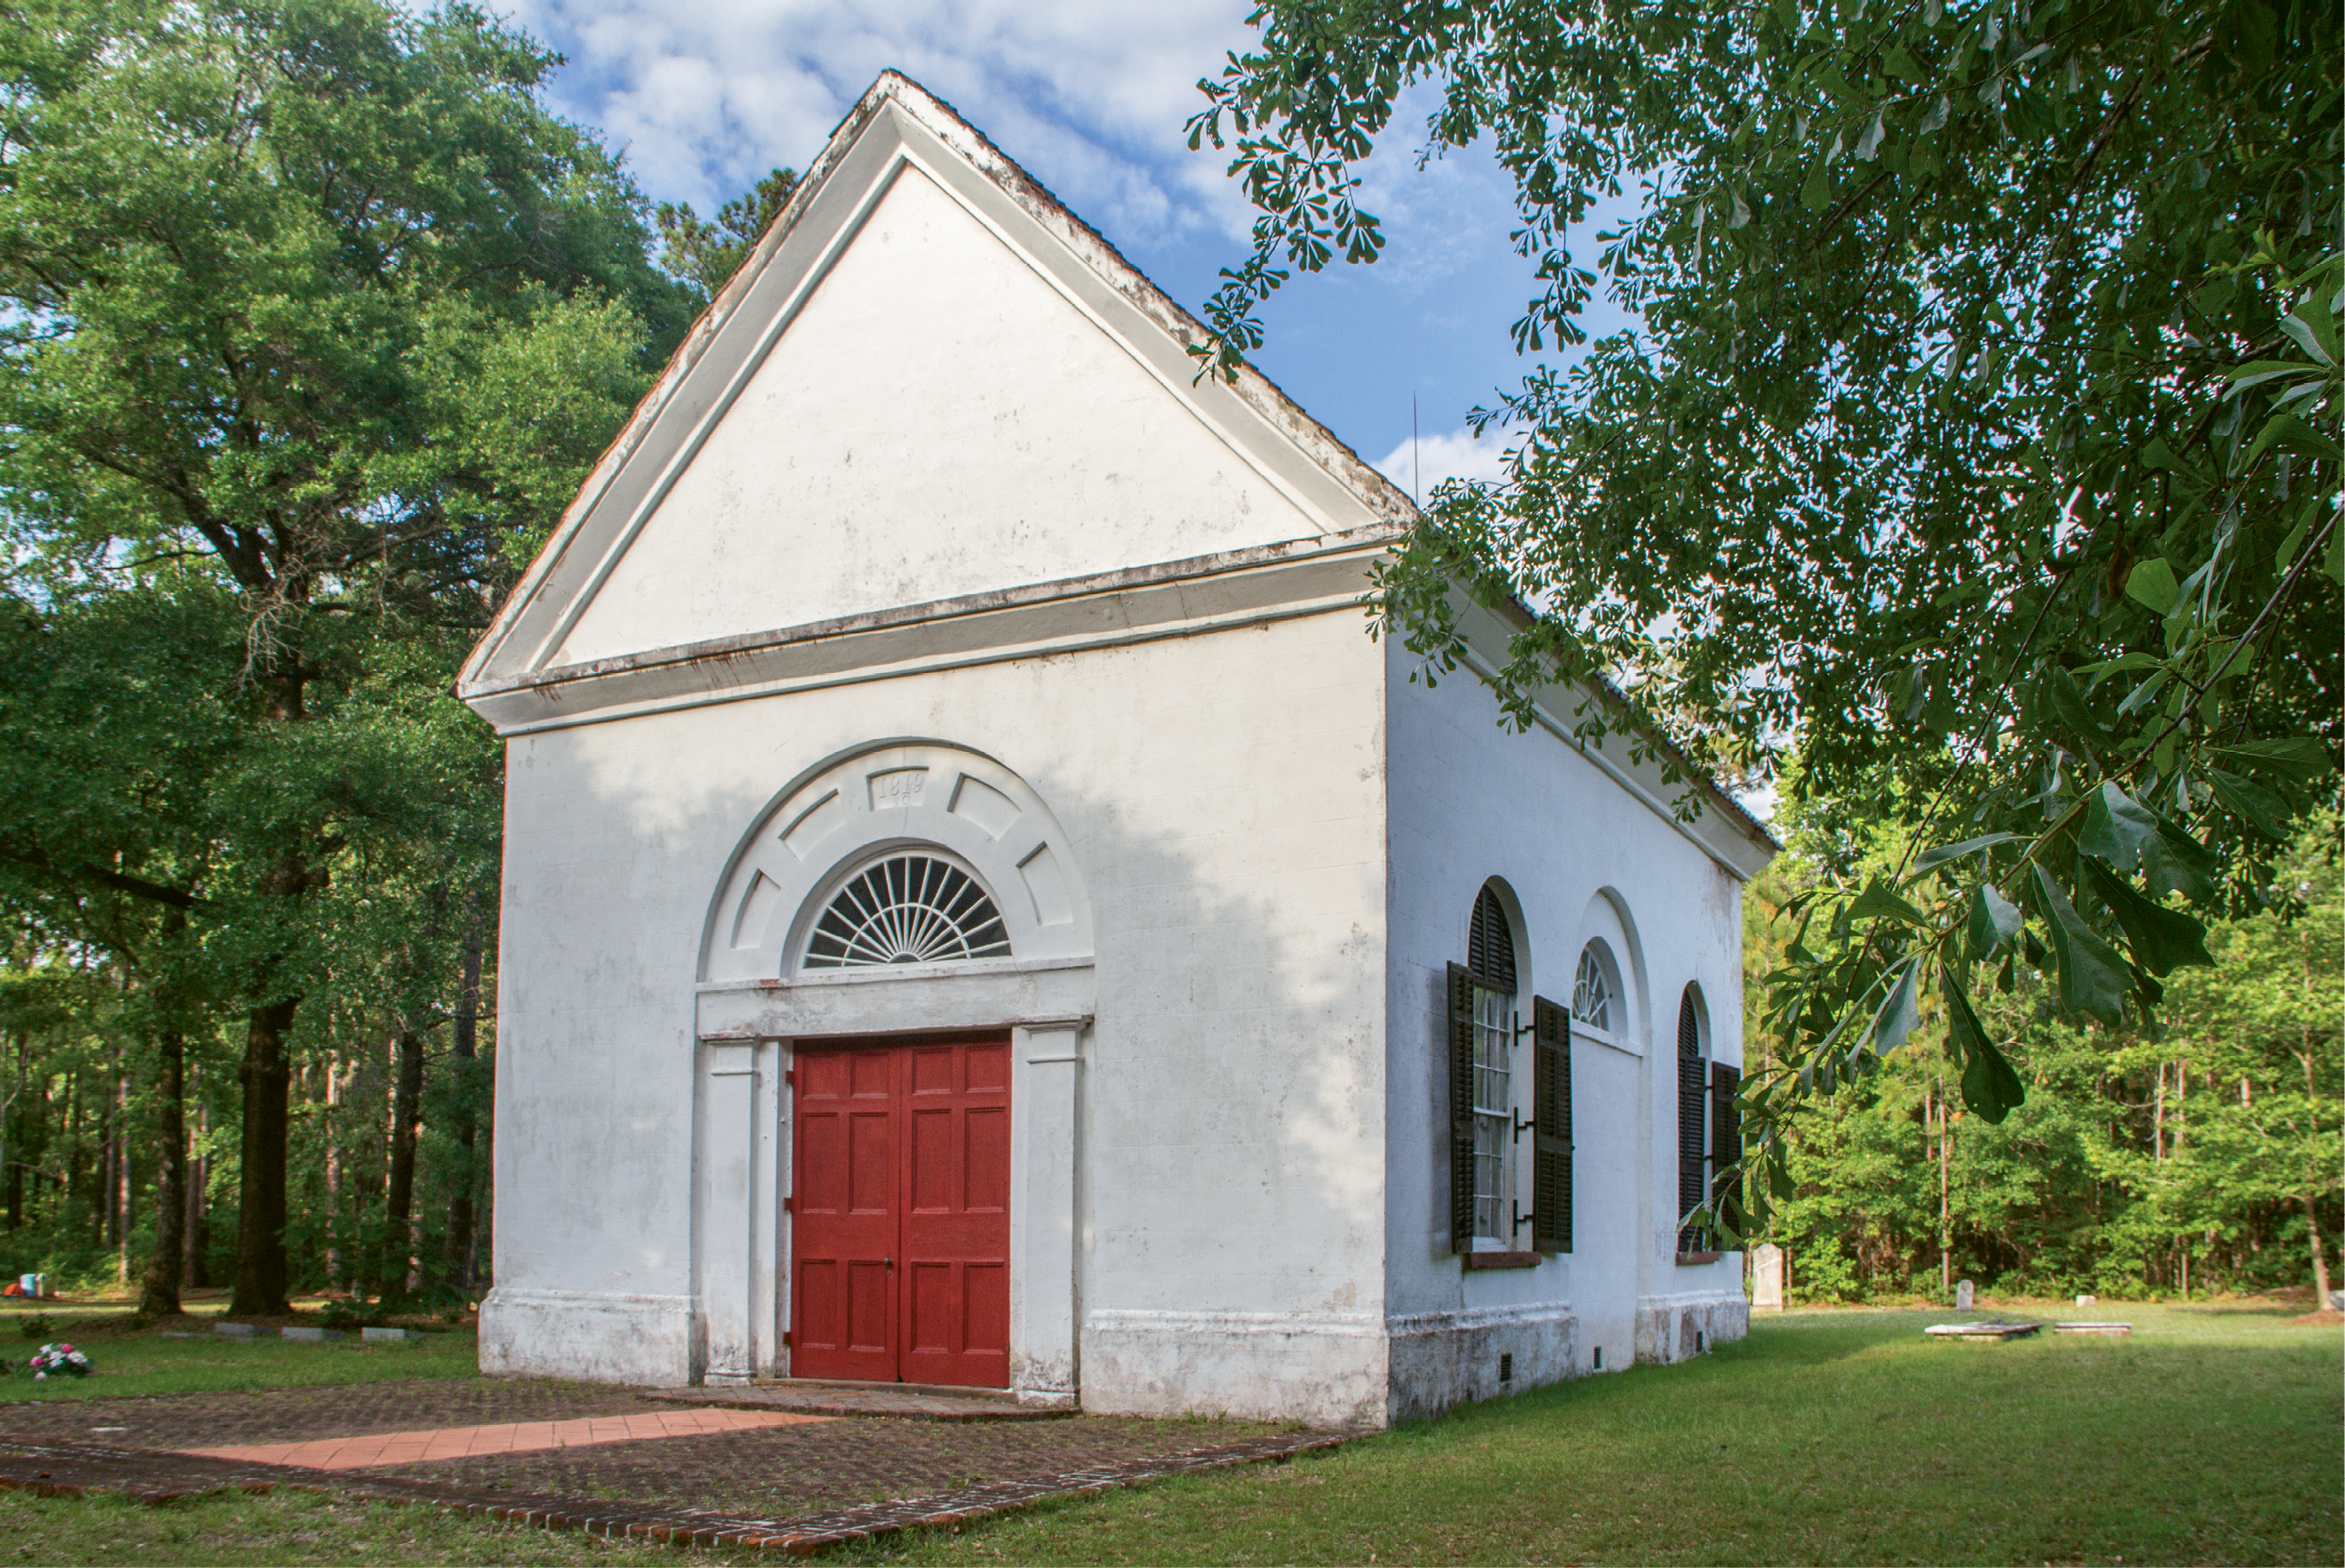 St. Thomas Parish Church was listed in the National Register of Historic Places in 1977.